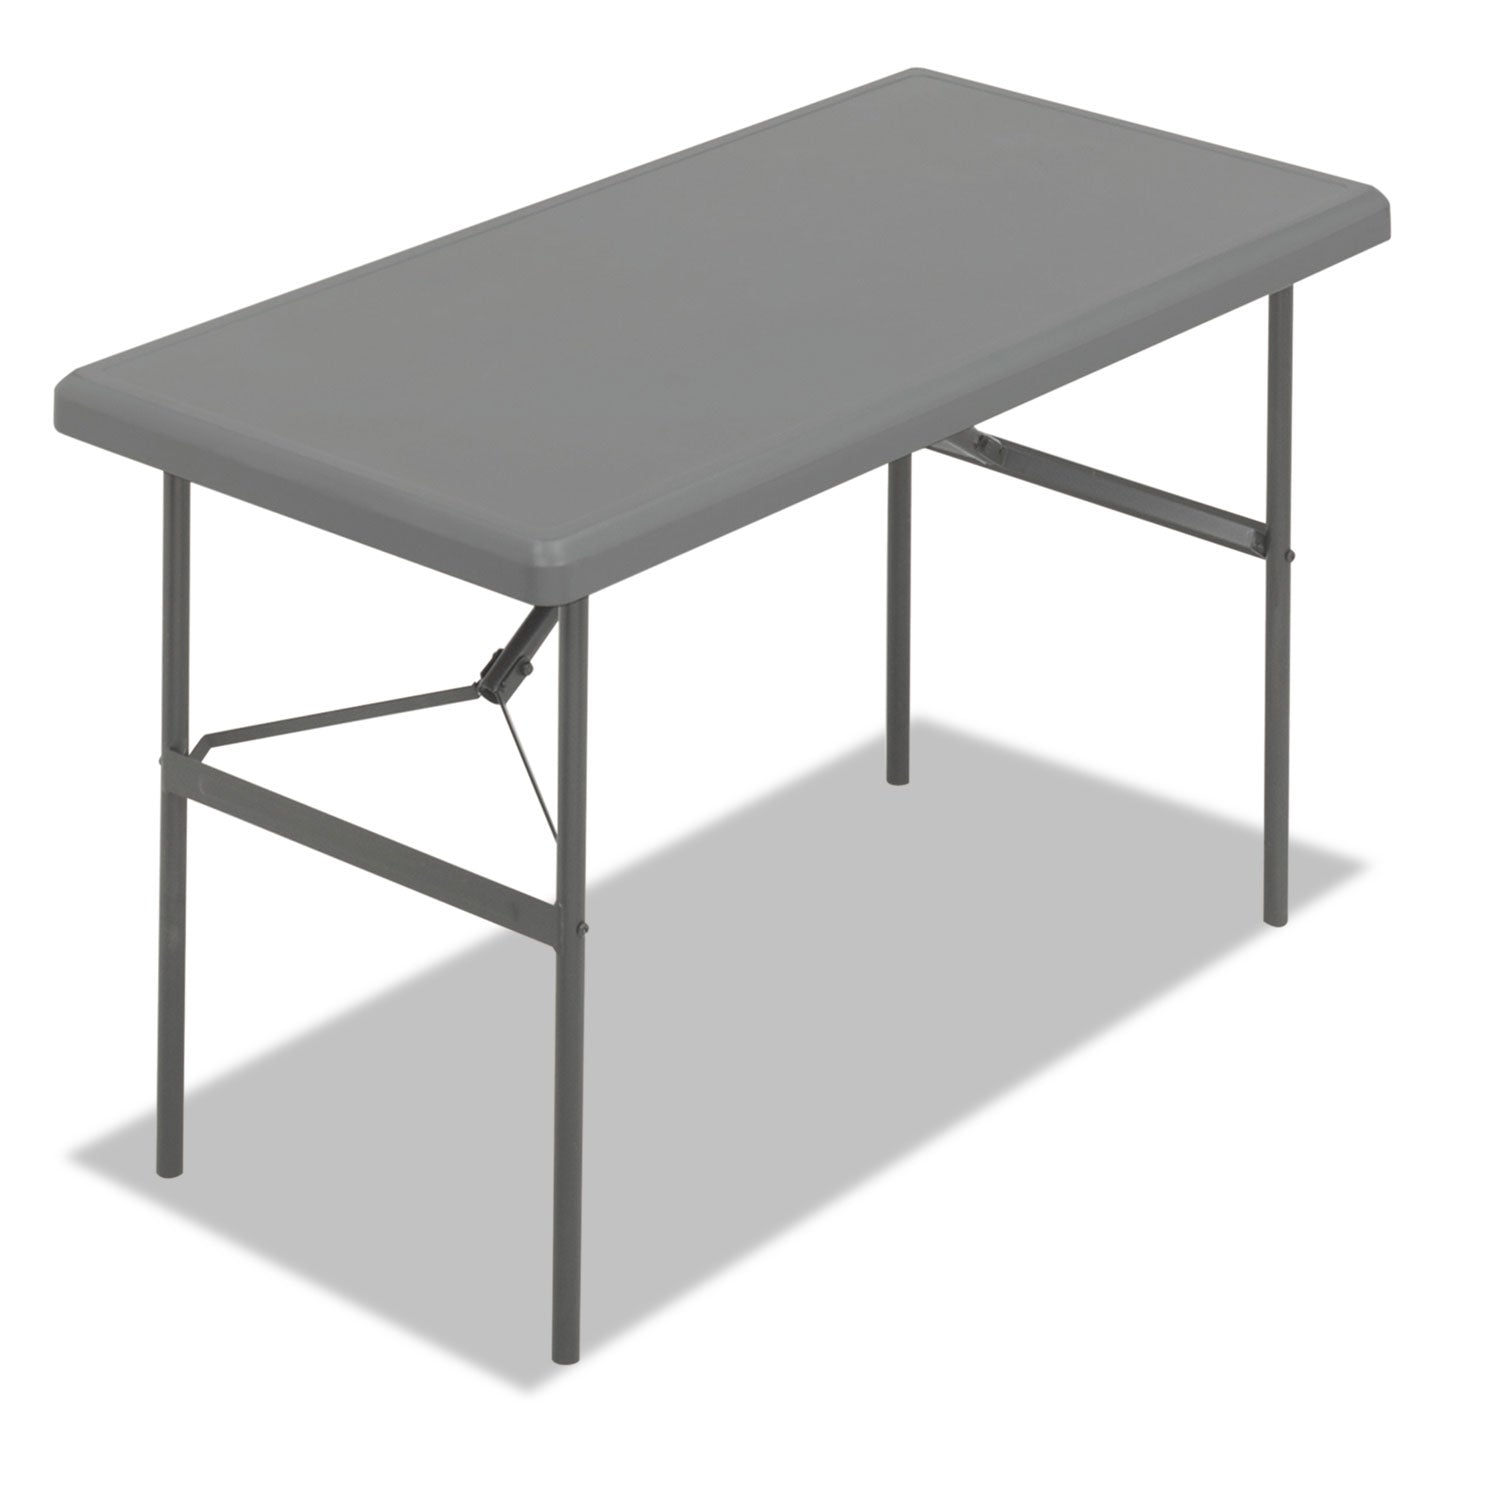 IndestrucTable Classic Folding Table, Rectangular, 48" x 24" x 29", Charcoal - 